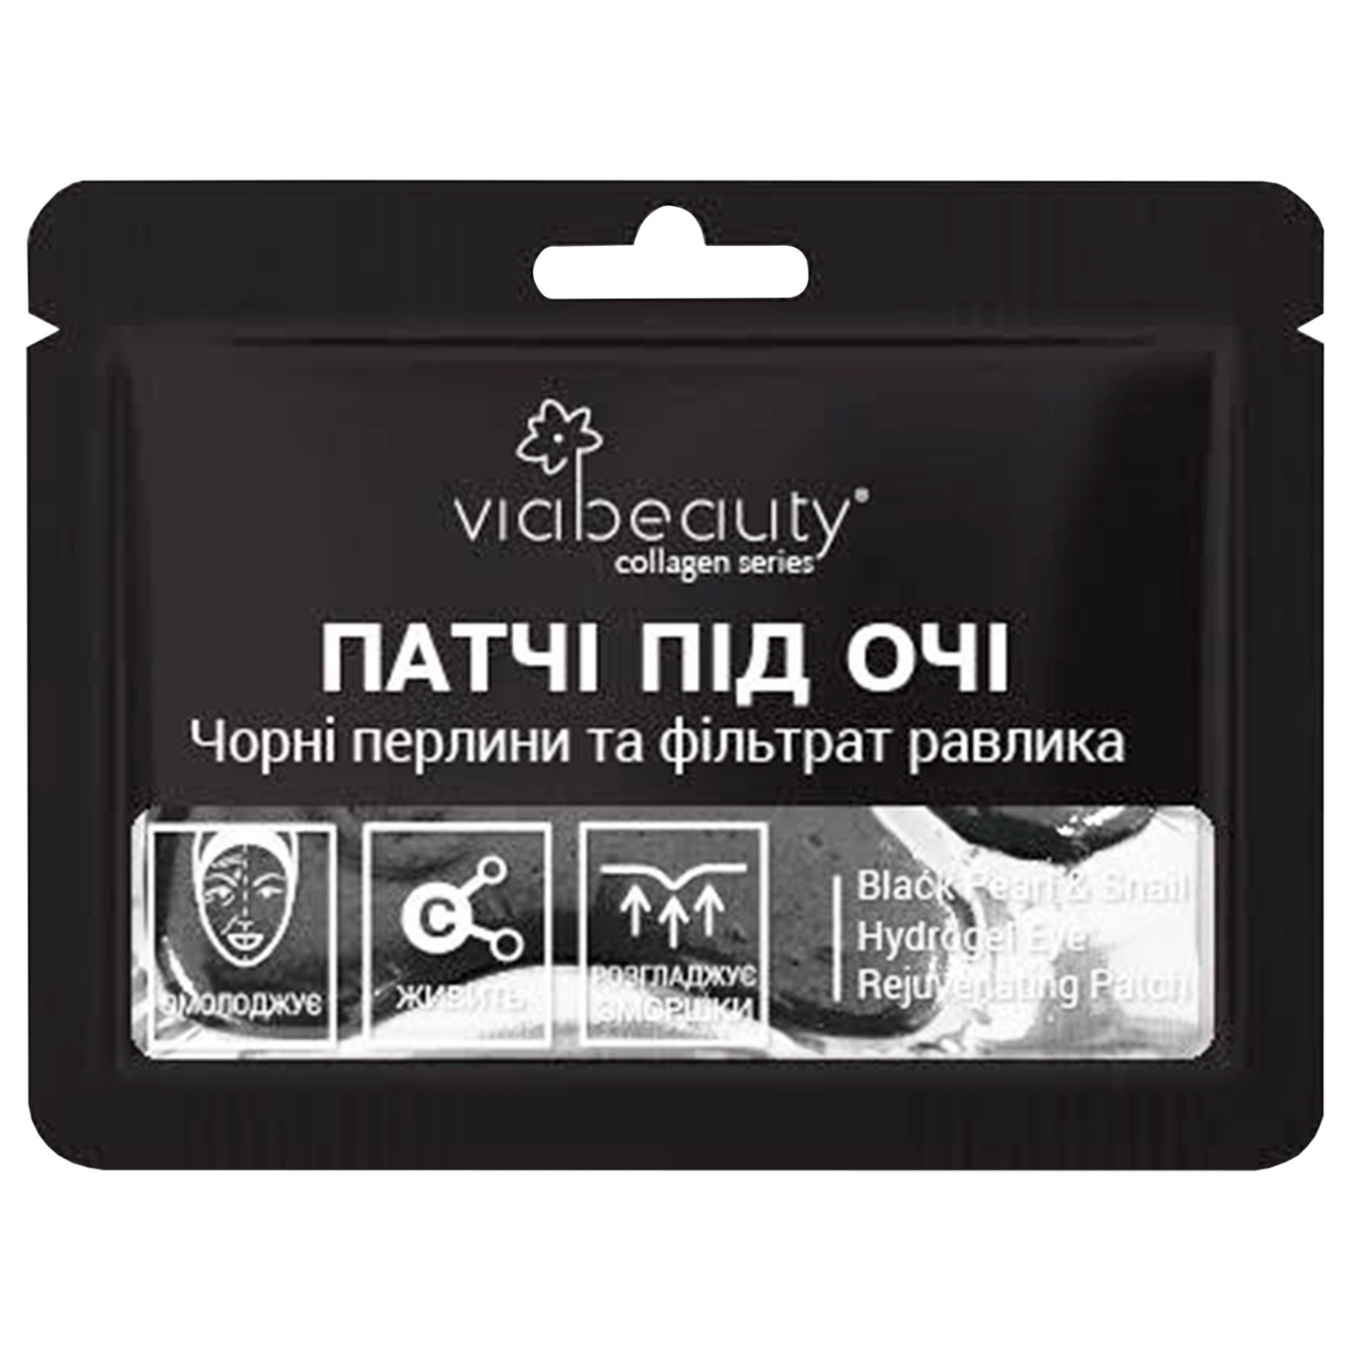 VIABEAUTY hydrogel rejuvenating under-eye patches with black pearl and snail filtrate extract 1pc